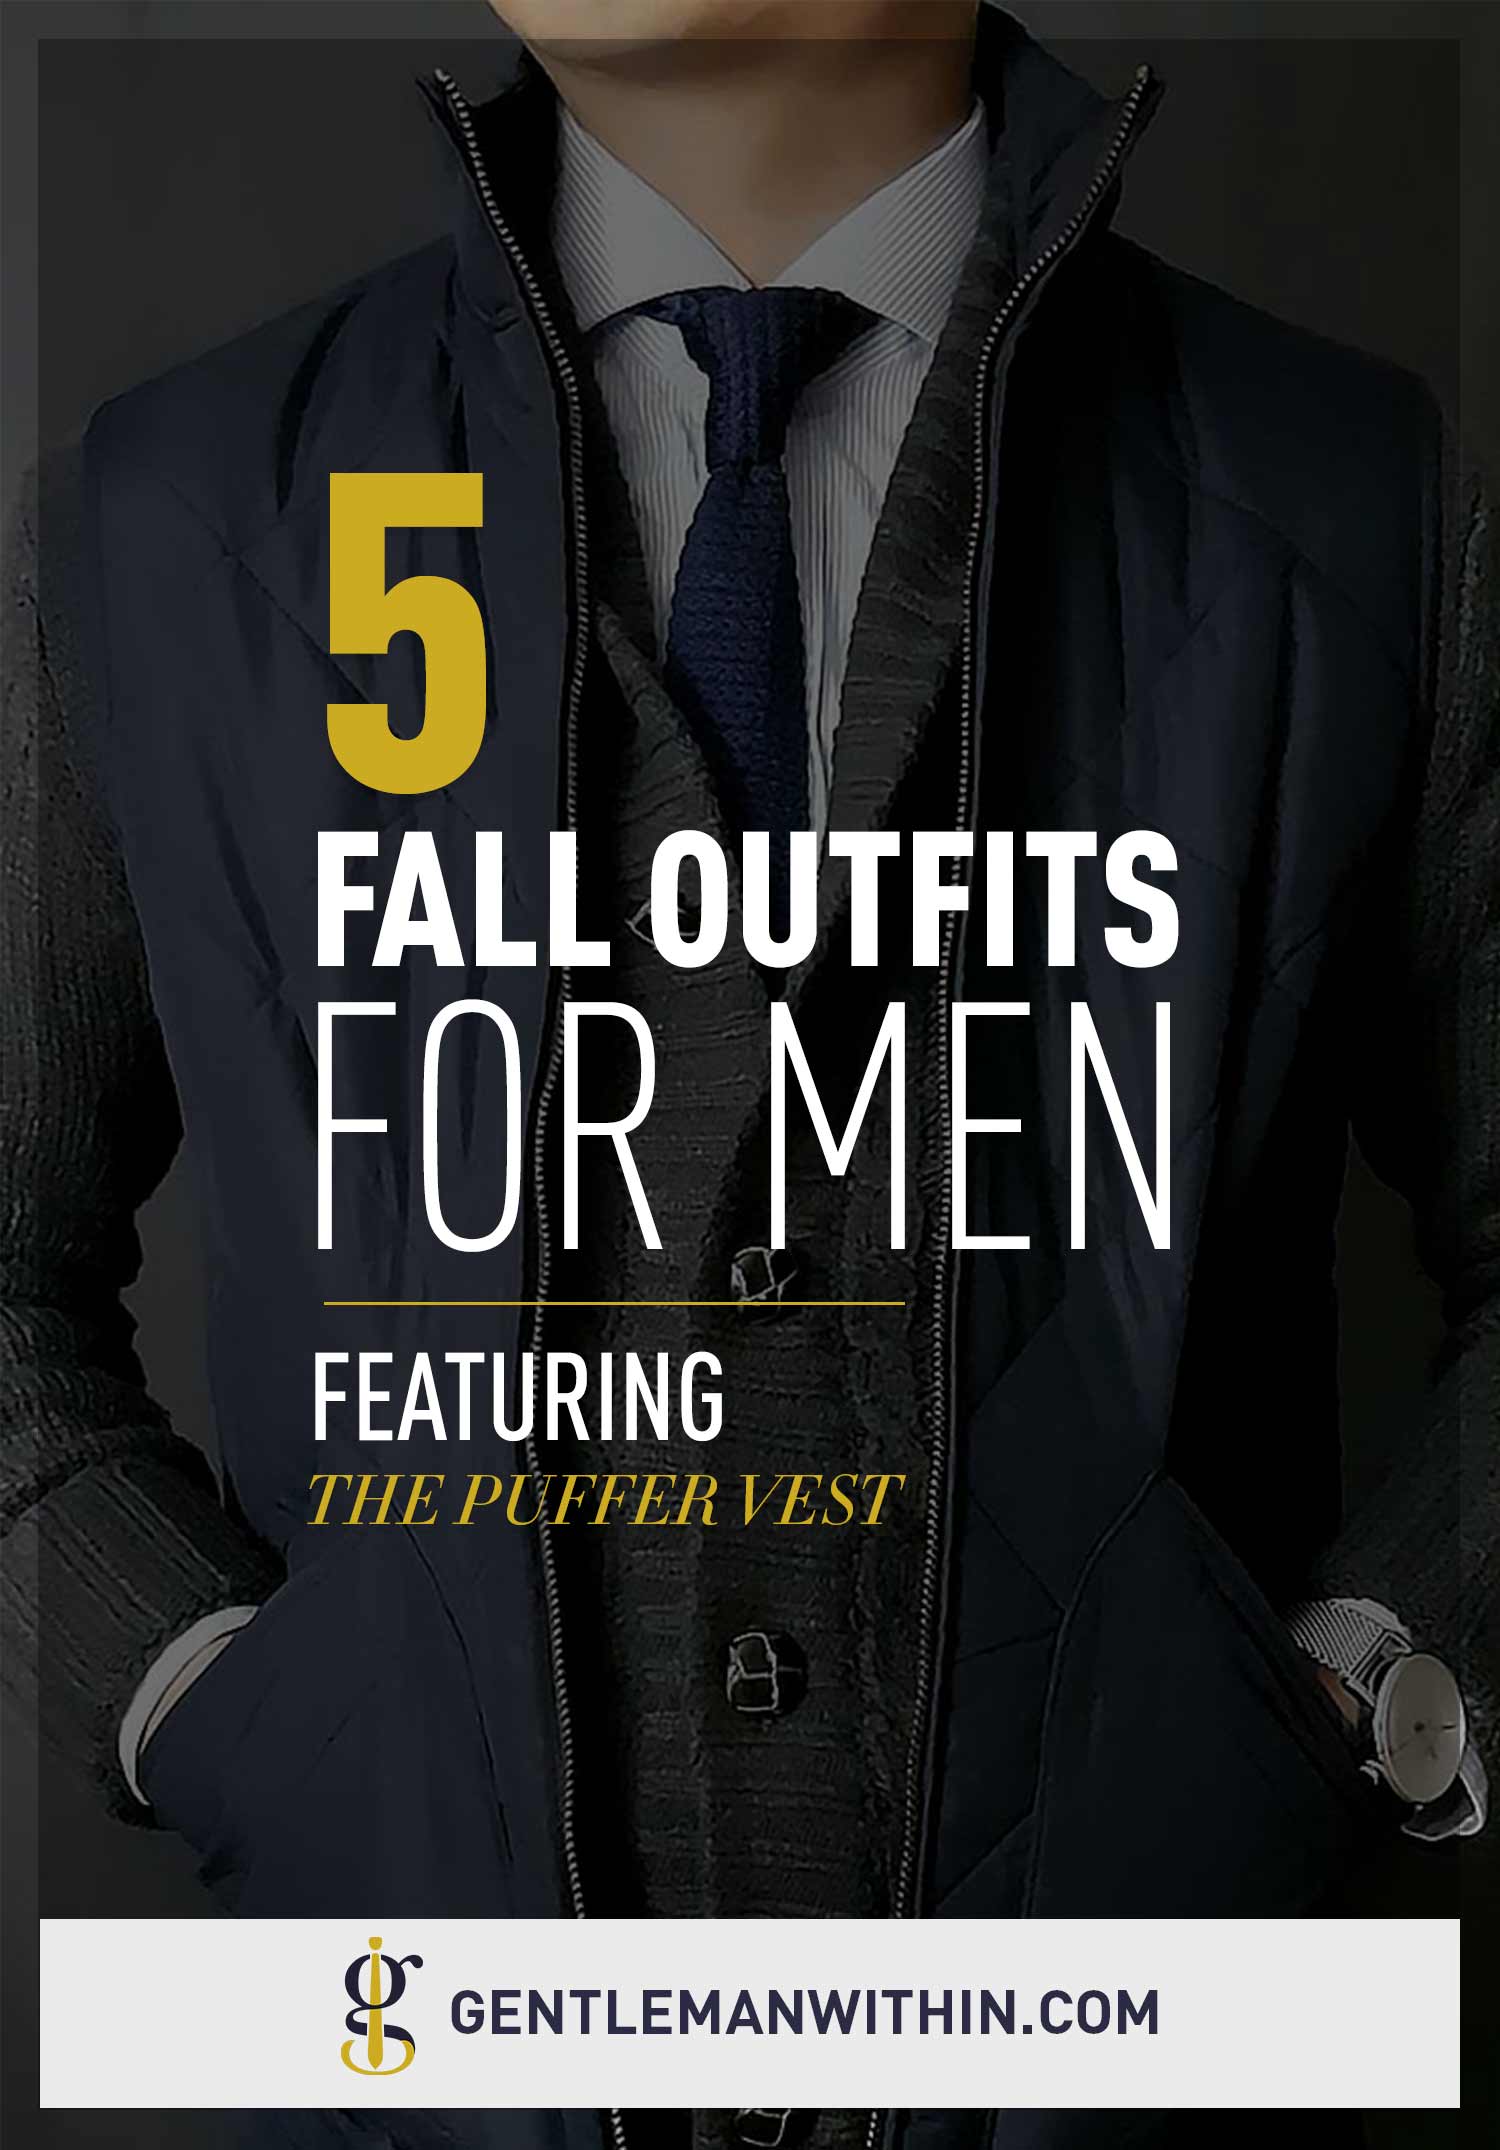 How To Wear A Puffer Vest | GENTLEMAN WITHIN